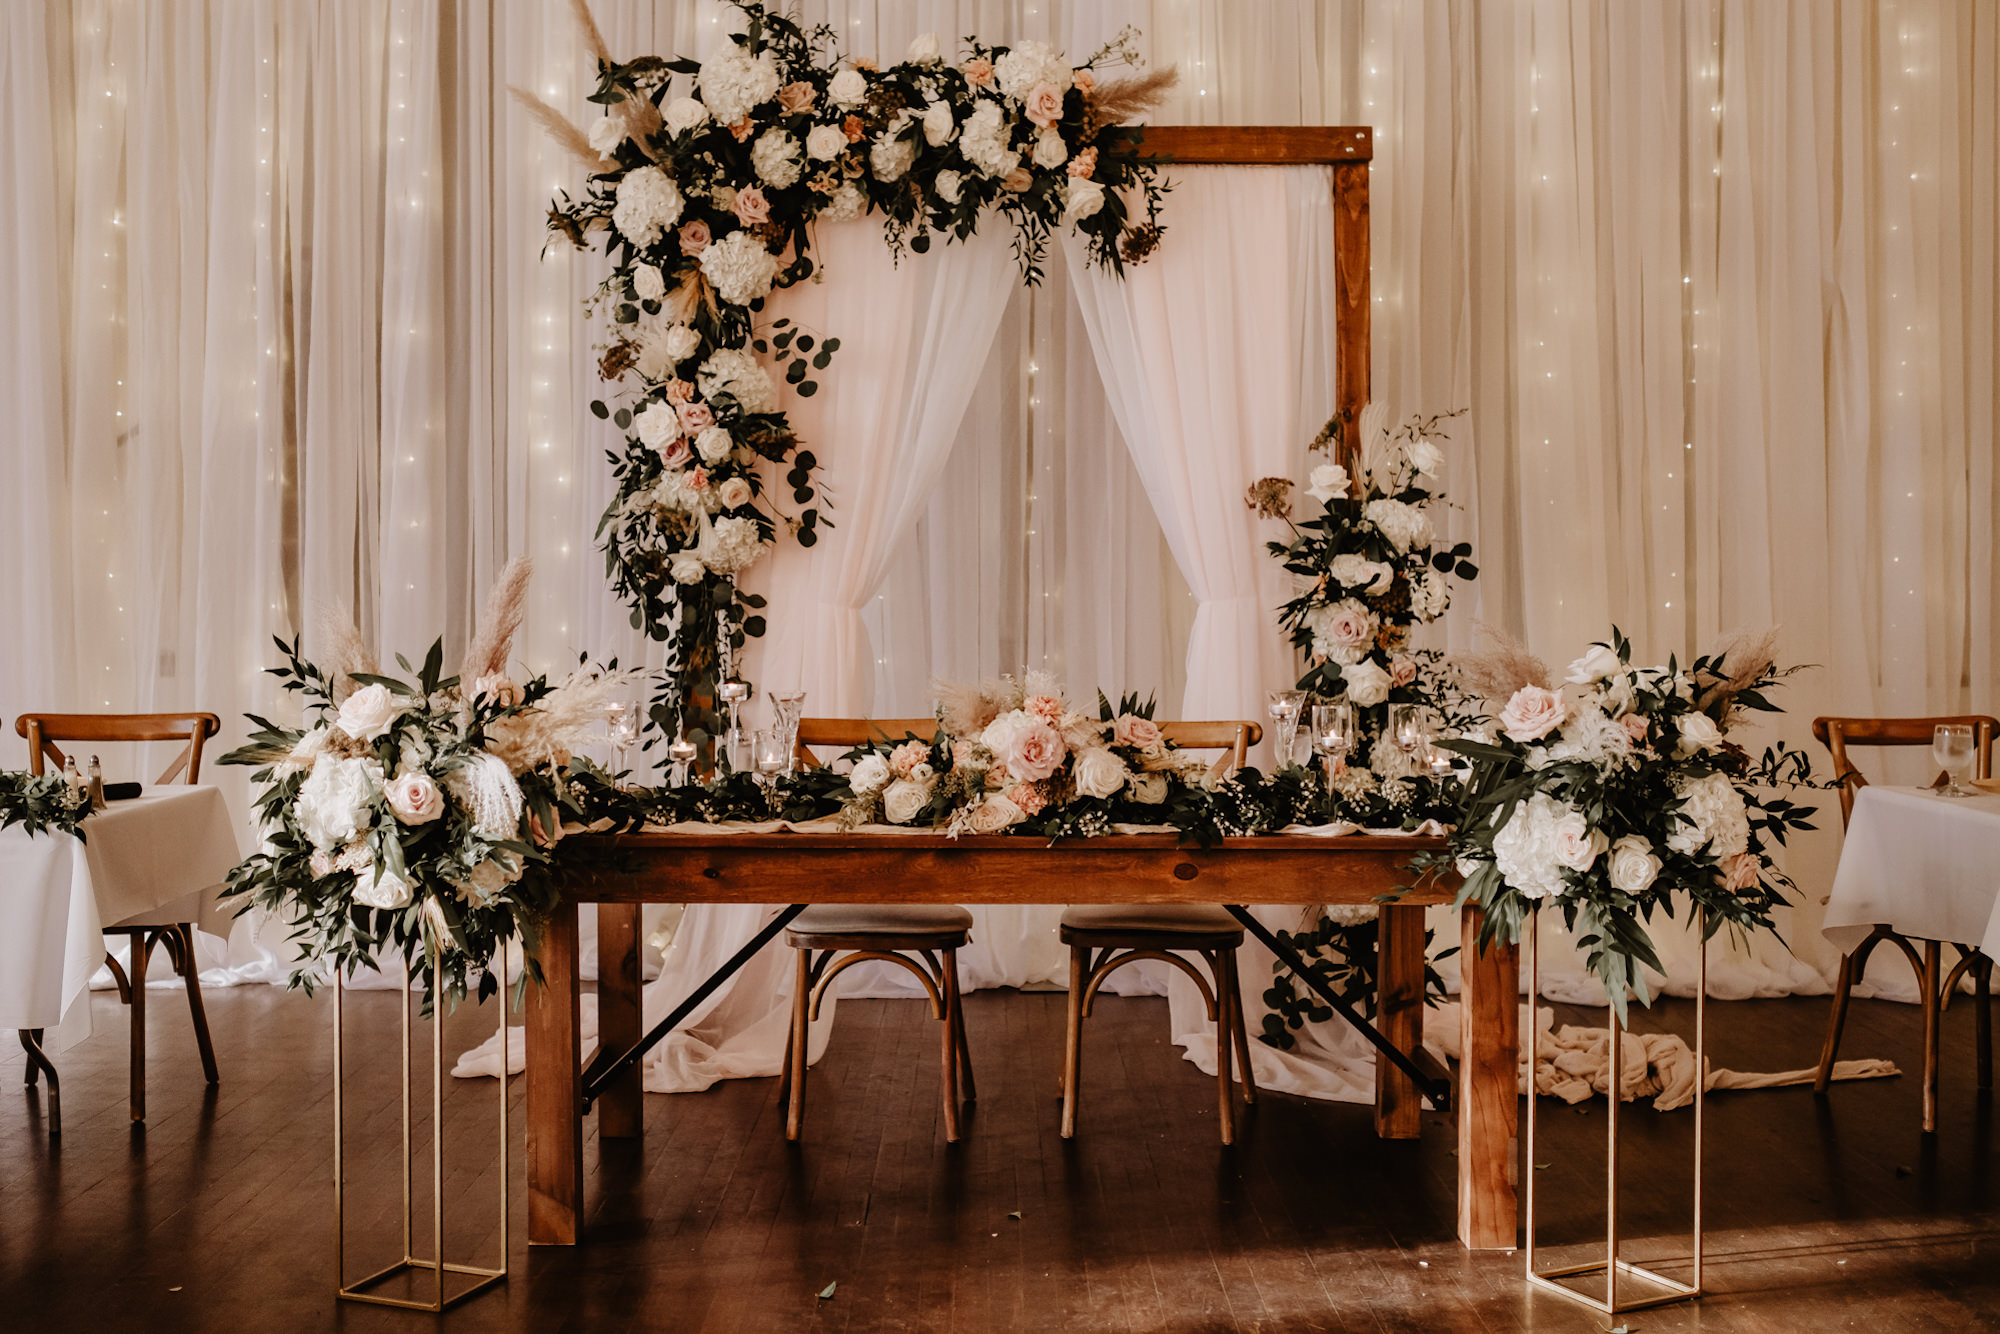 Neutral Boho Modern Wedding Reception Decor, Wooden Sweetheart Table, Wooden Cross Back Chairs, Wooden Arch with White Draping, Hanging String Lights Backrop, Lush Greenery, White Hydrangeas, Blush Pink Roses, Pampas Grass Flowers | Tampa Bay Wedding Planner Taylored Affairs | St. Pete Wedding Rentals Gabro Event Services